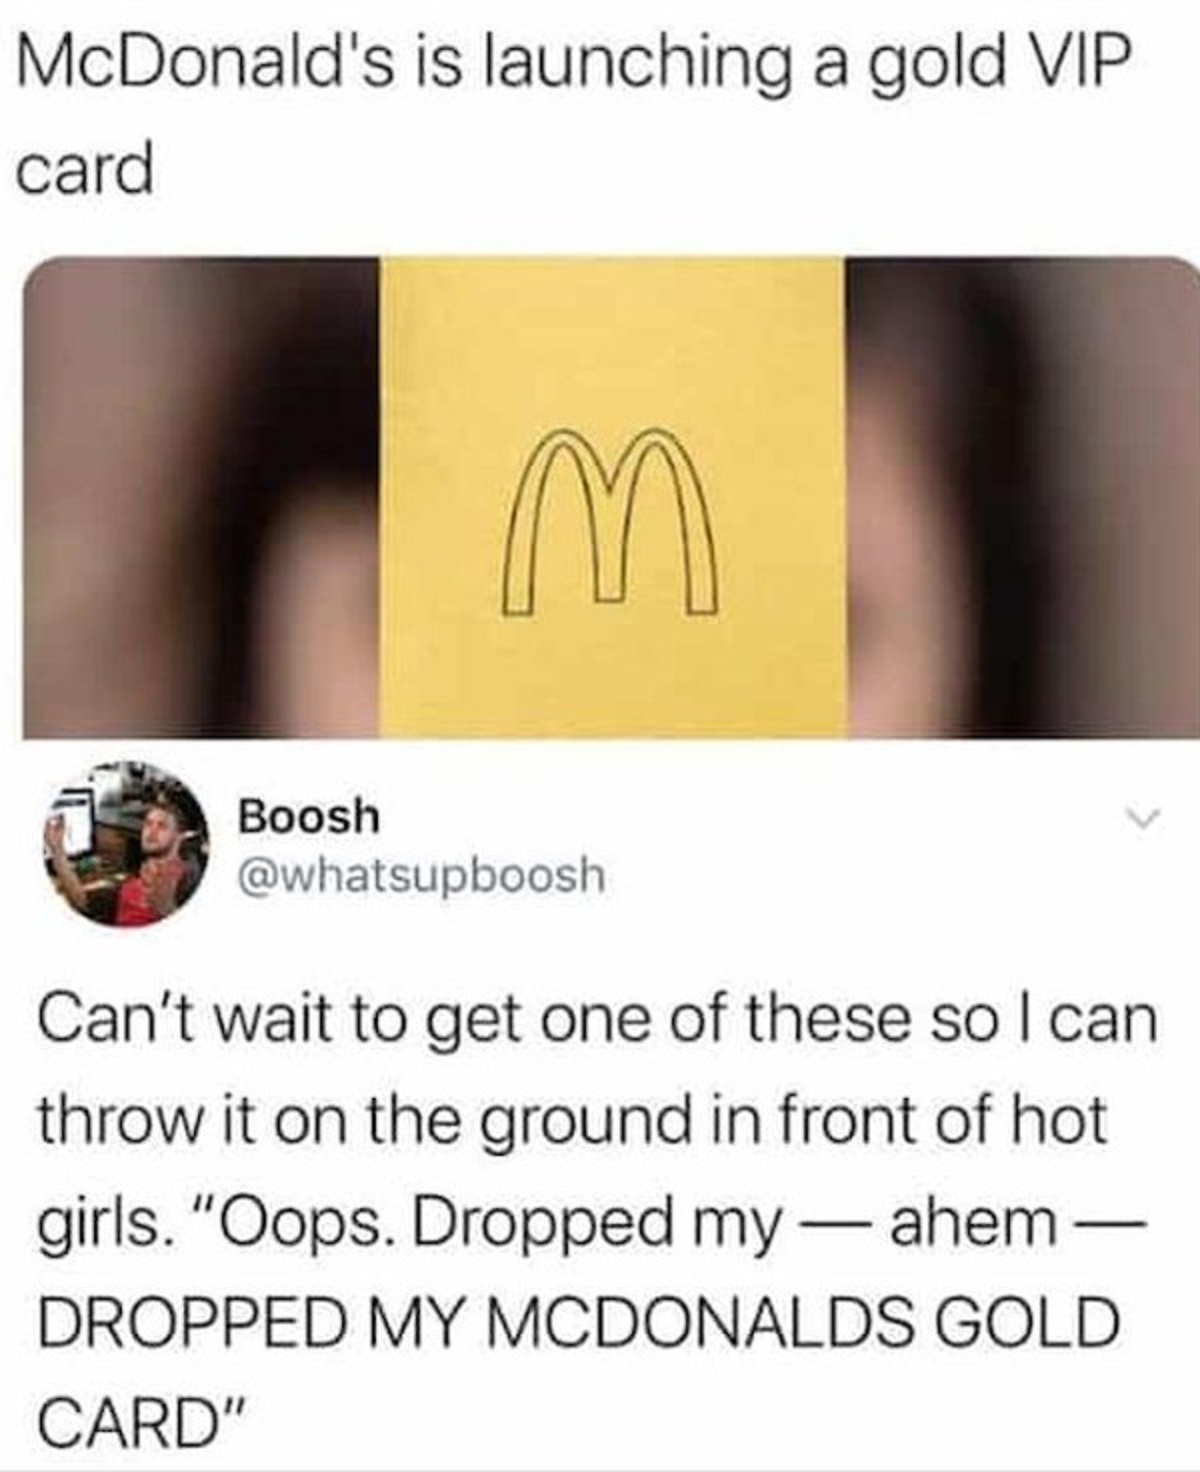 lip - McDonald's is launching a gold Vip card M Boosh Can't wait to get one of these so I can throw it on the ground in front of hot girls. "Oops. Dropped my ahem Dropped My Mcdonalds Gold Card"